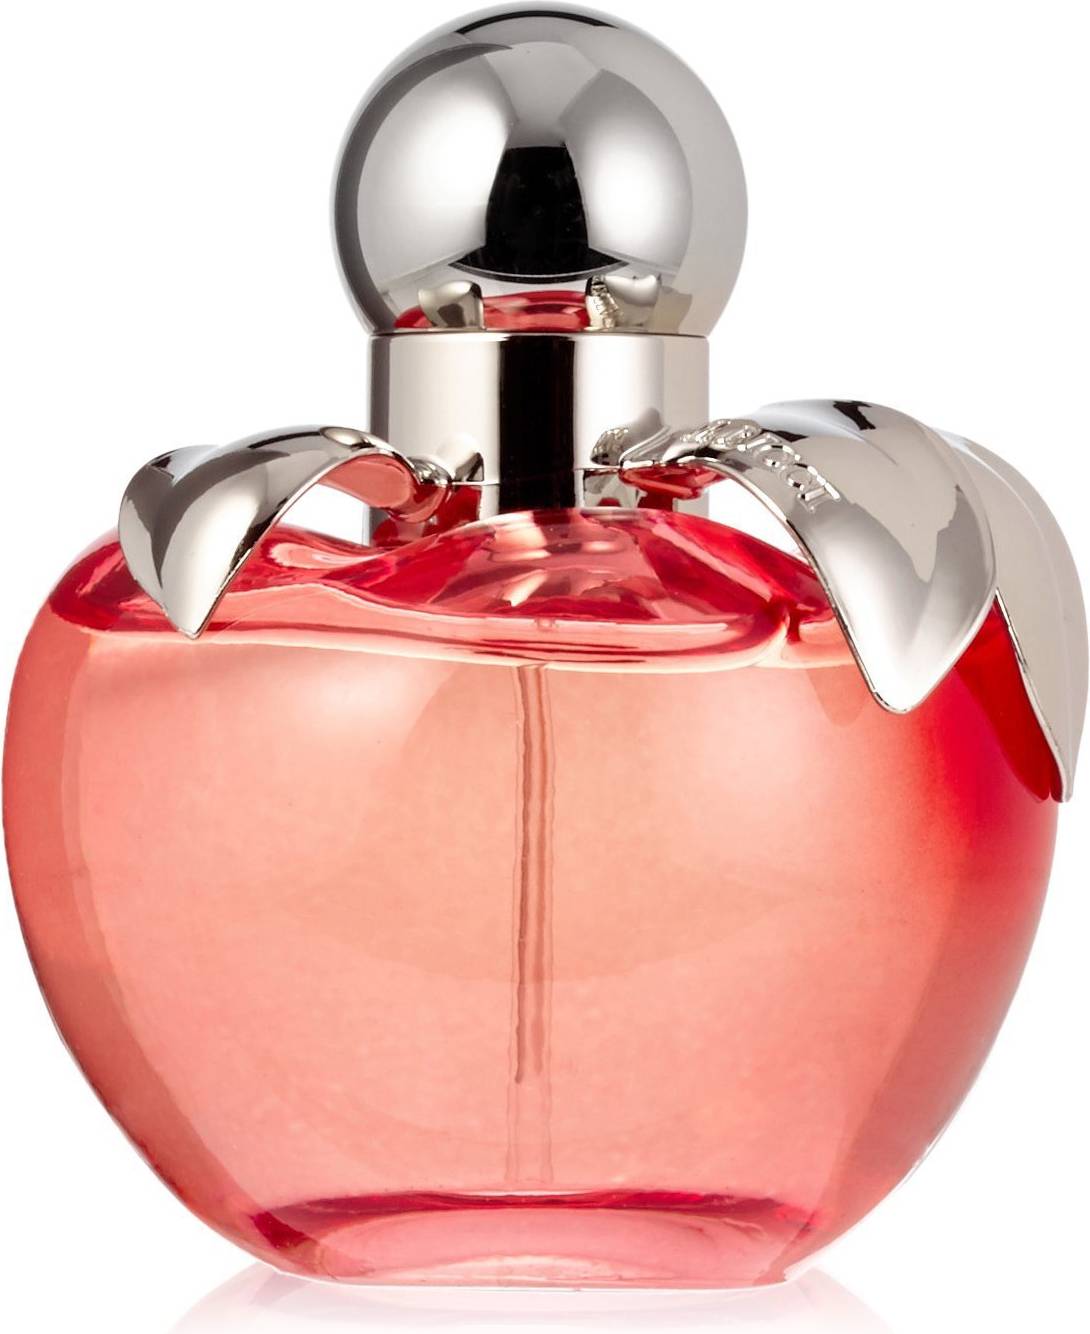 Nina Ricci EdT 50ml (4 stores) find the best price now